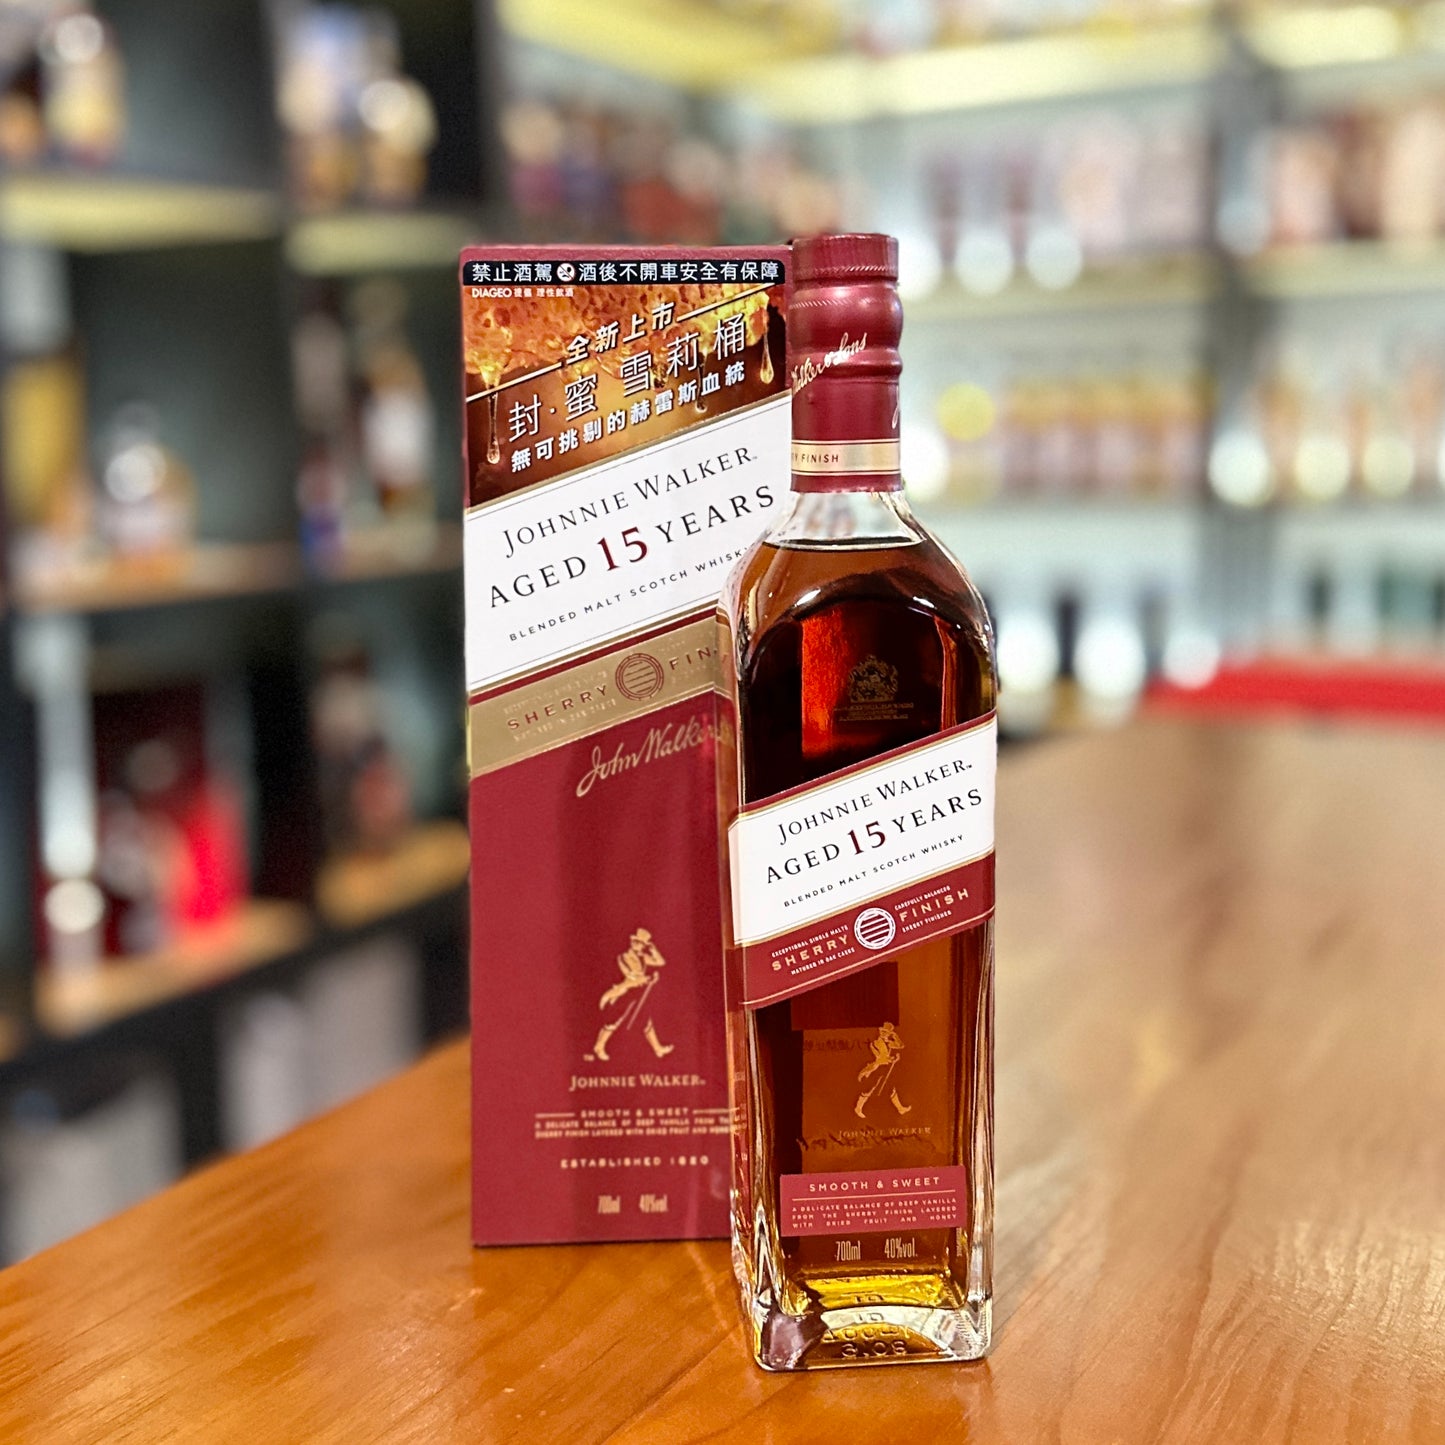 Johnnie Walker 15 Year Old Sherry Cask Finish Blended Scotch Whisky